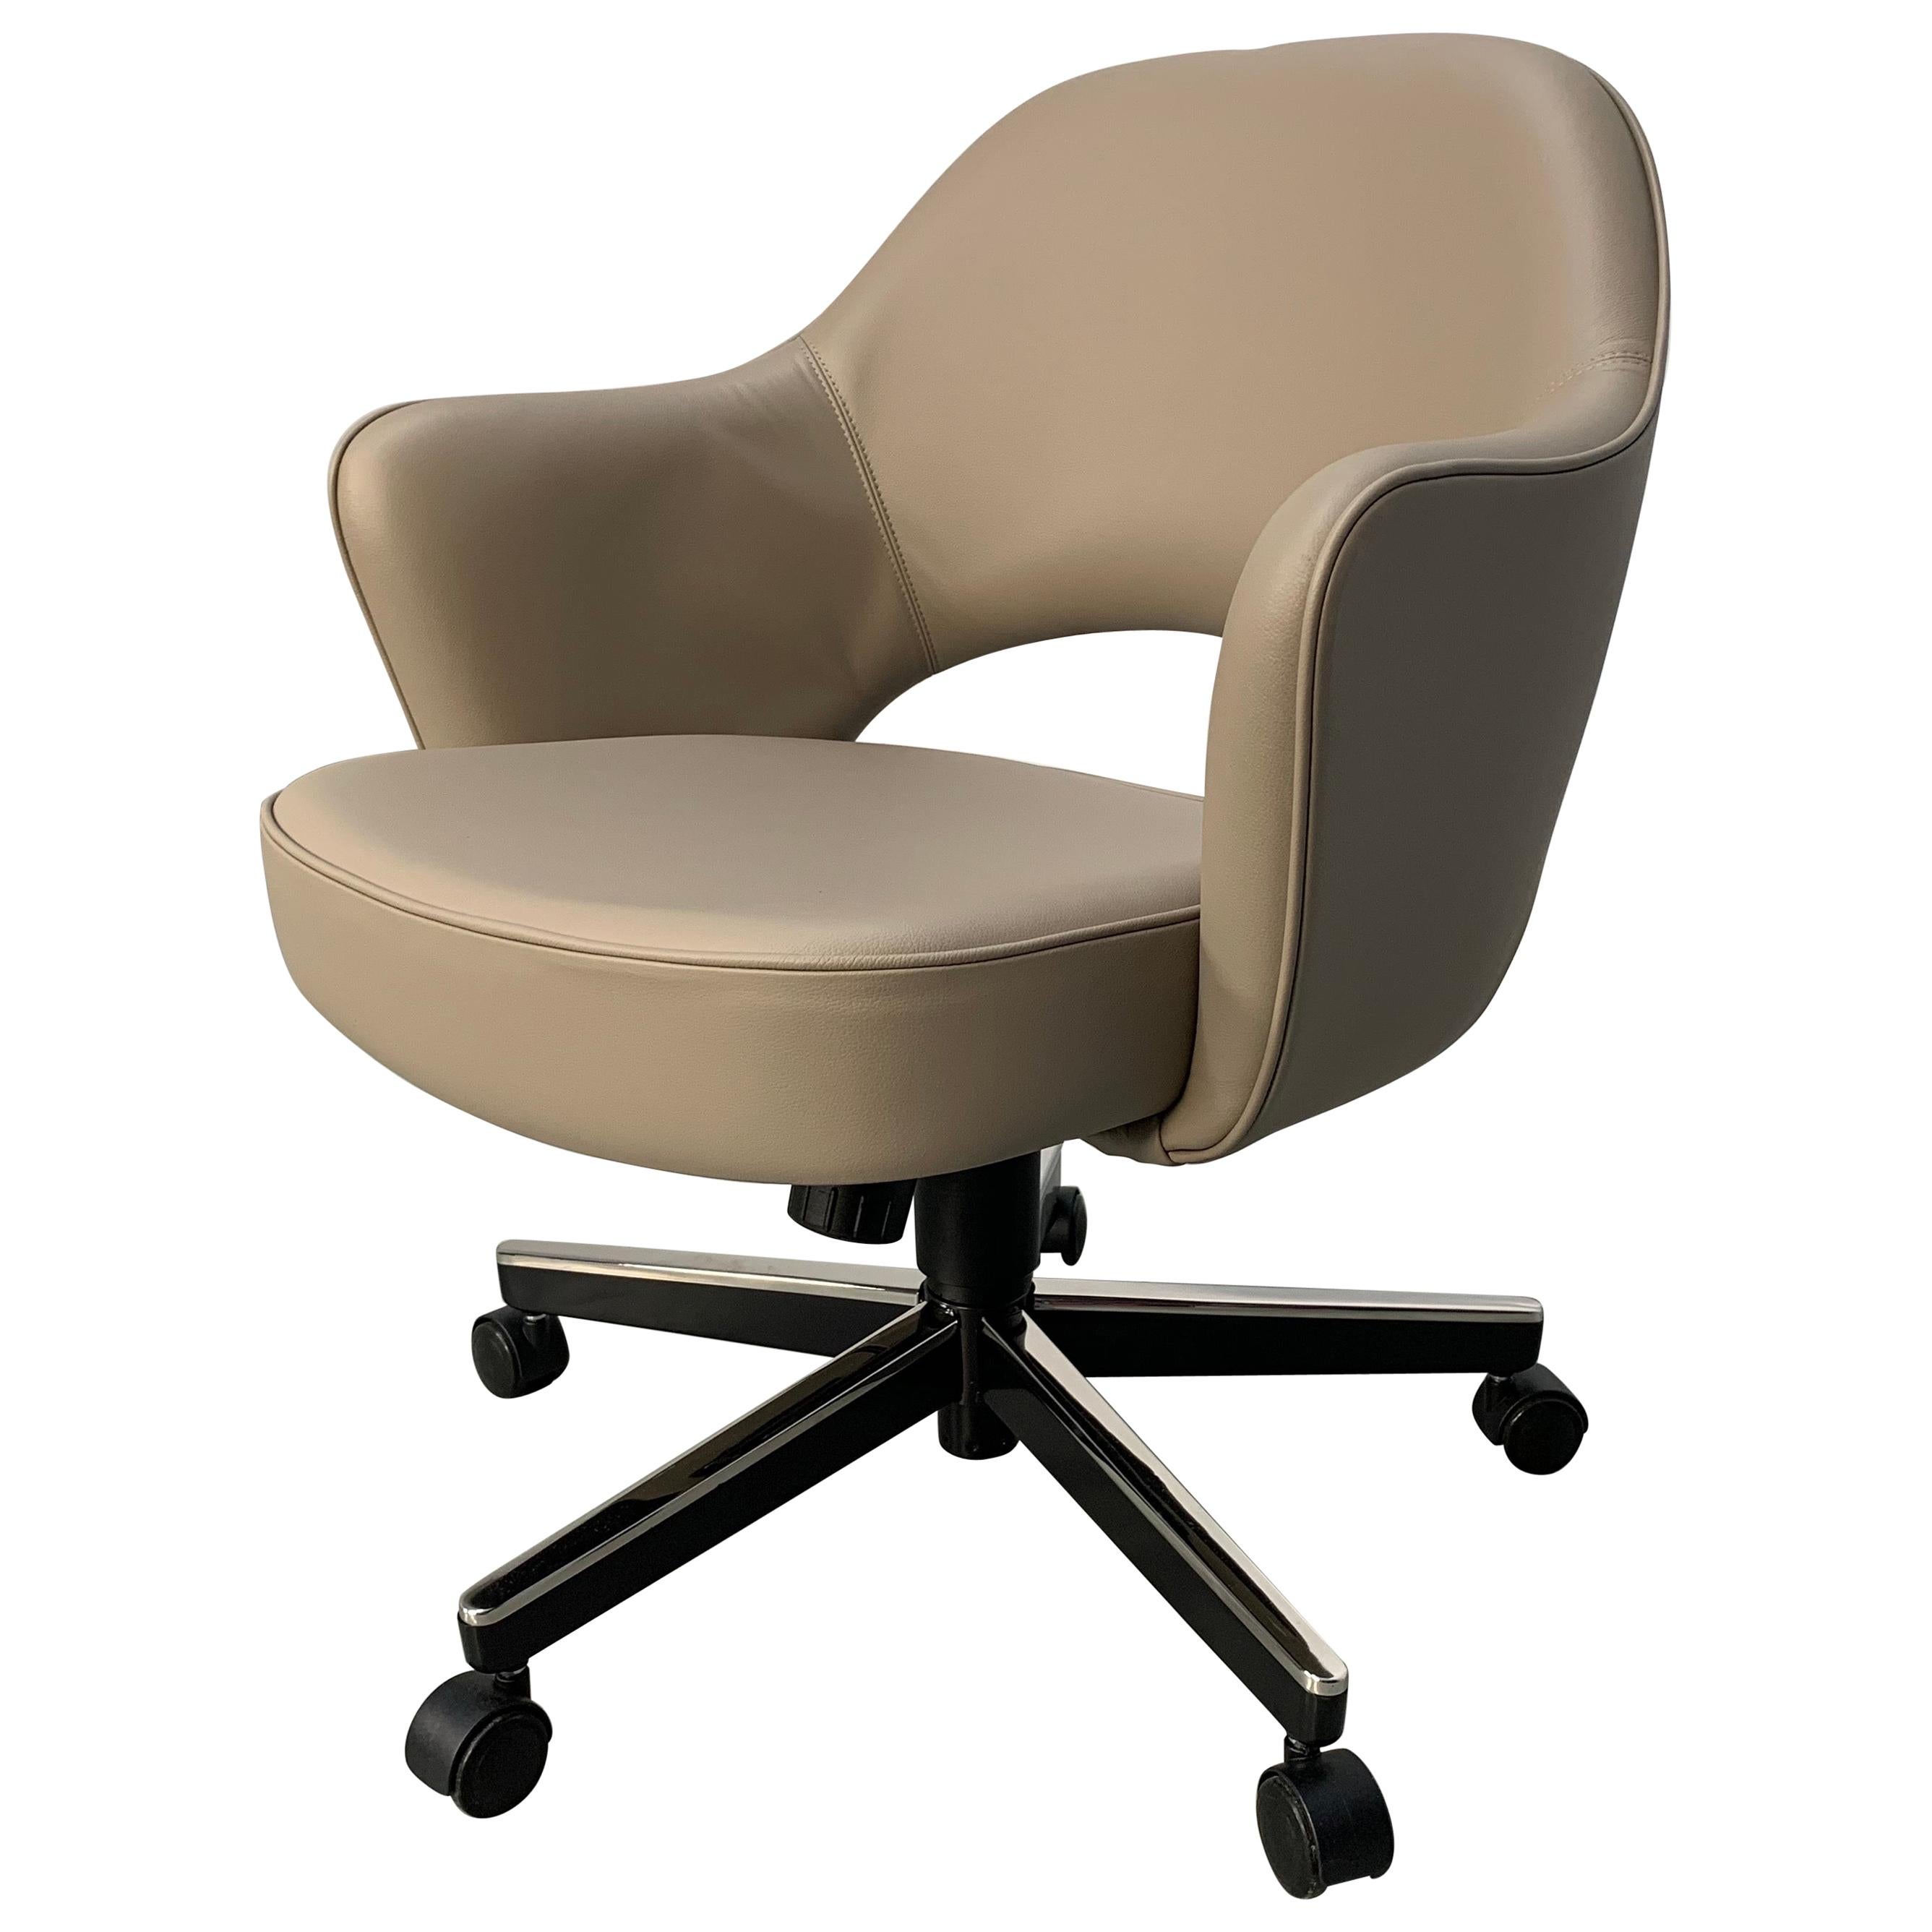 Knoll Studio "Saarinen Conference KNI-71A" Swivel Armchair in "Volo" Leather